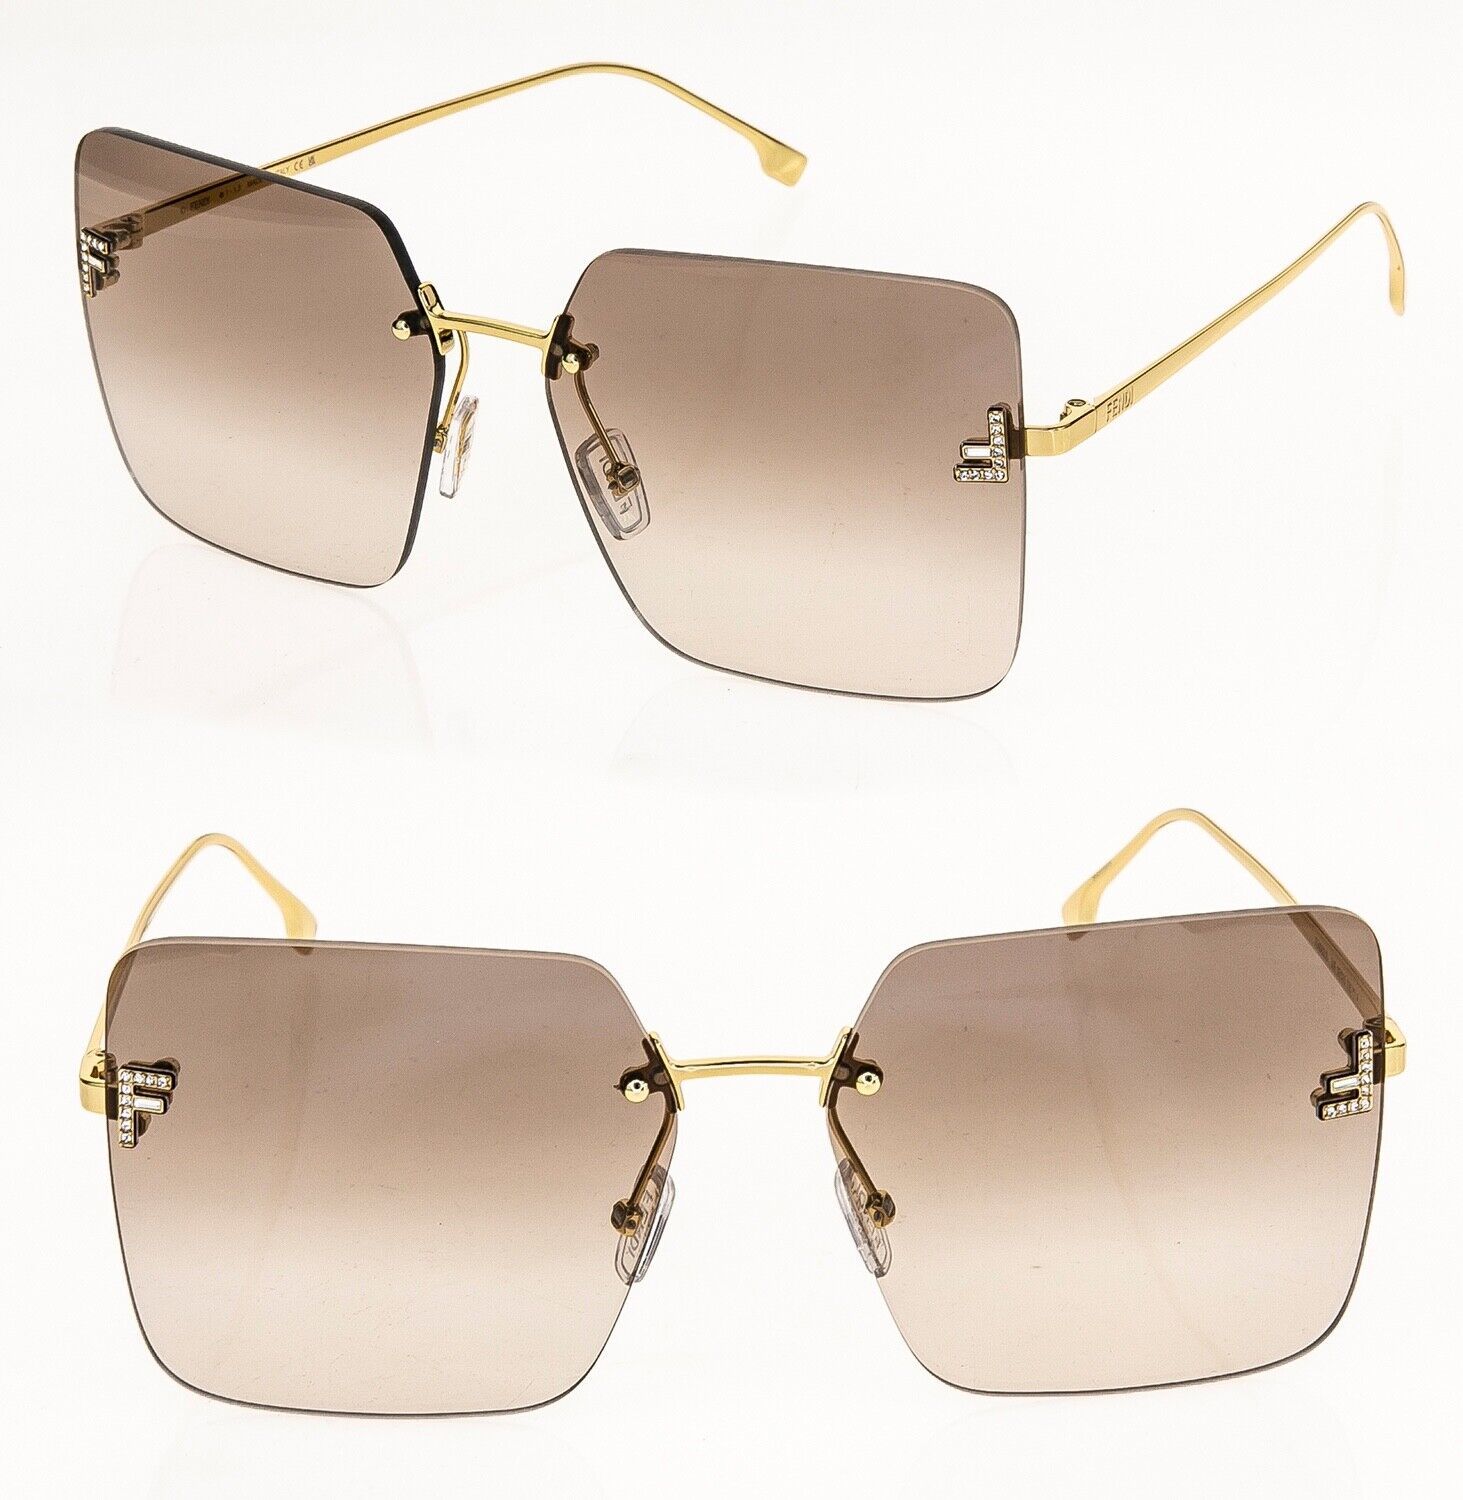 Fendi First - Shield sunglasses with gray gradient lenses